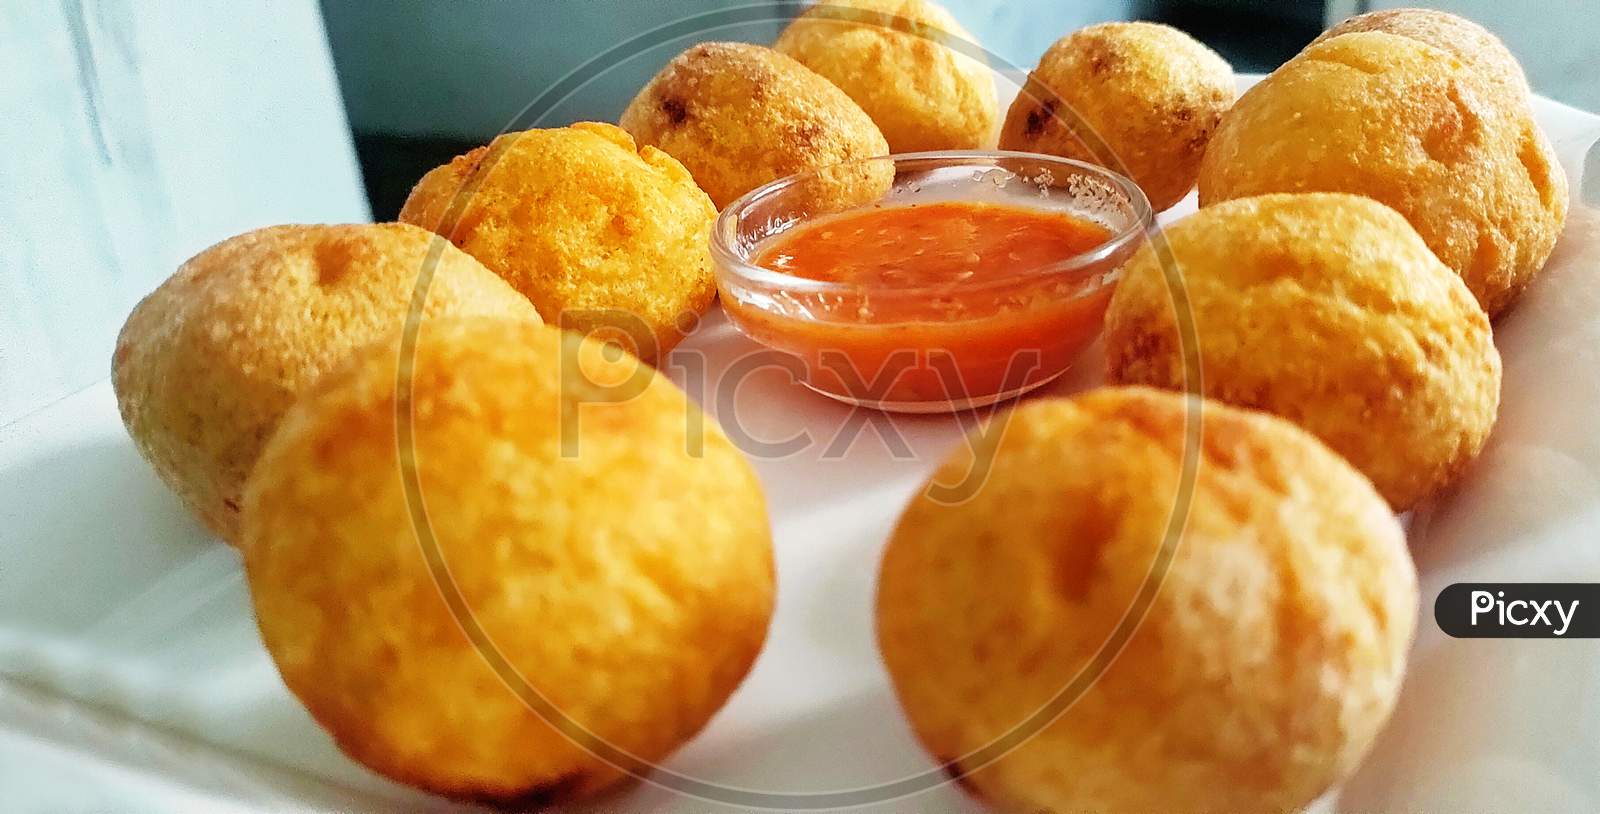 Potato Croquettes - Mashed Potatoes Balls Breaded And Deep Fried